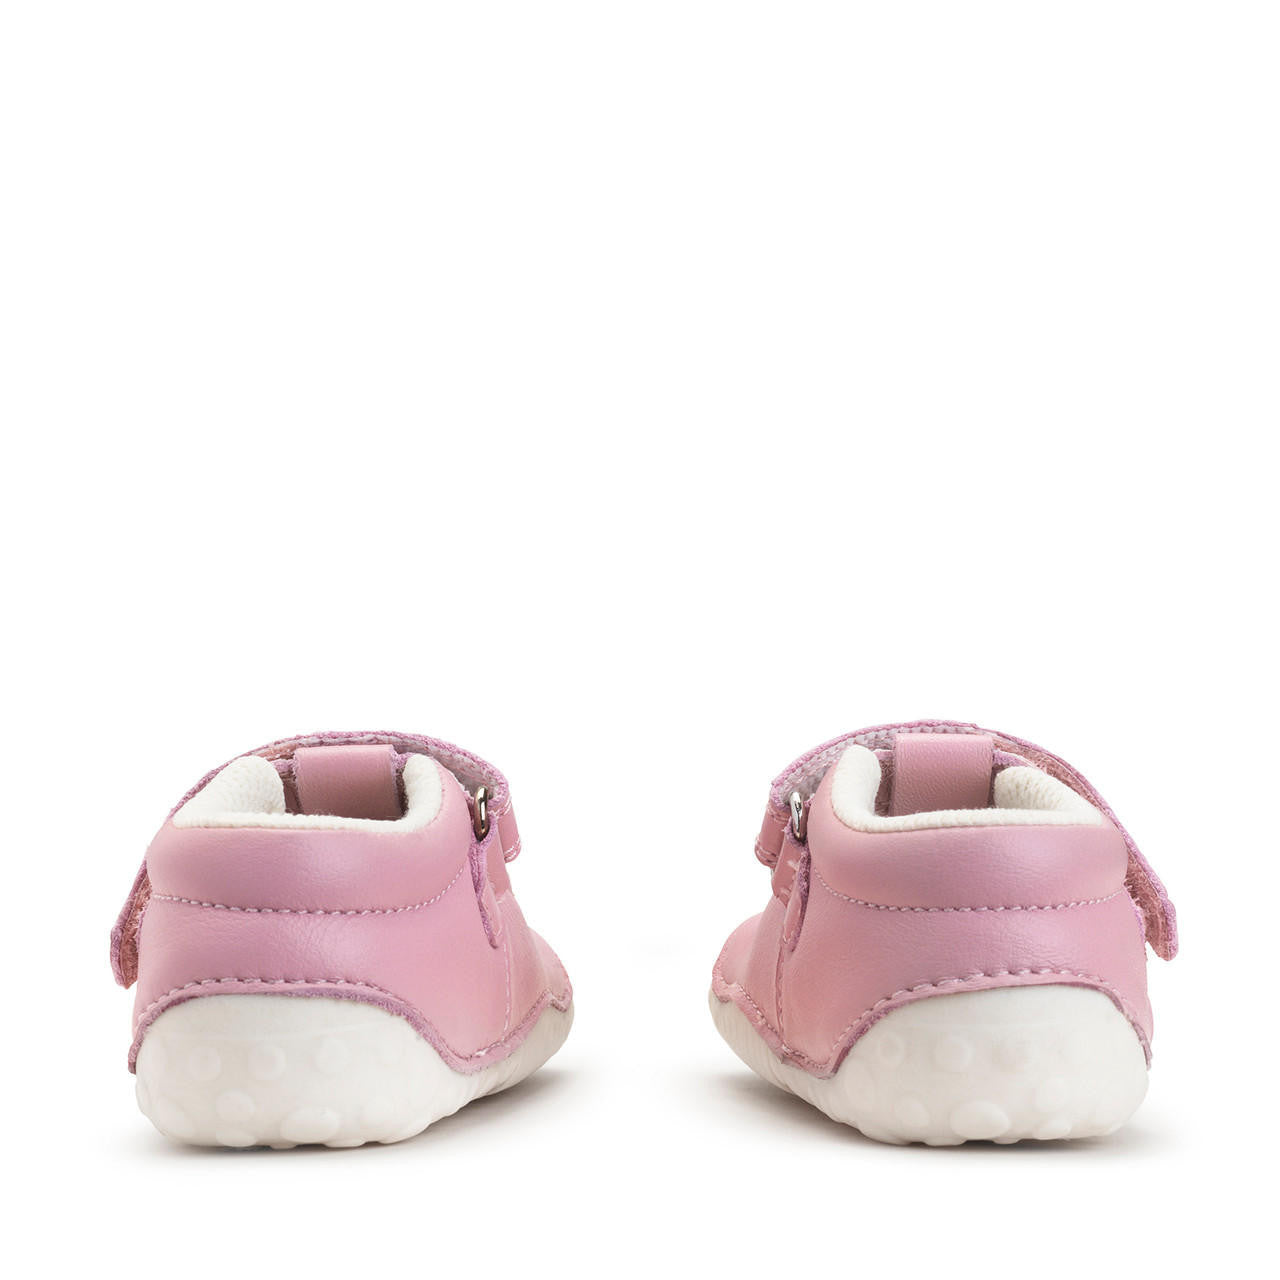 Tumble Girl's T-Bar Pale Pink Leather Pre-Walker